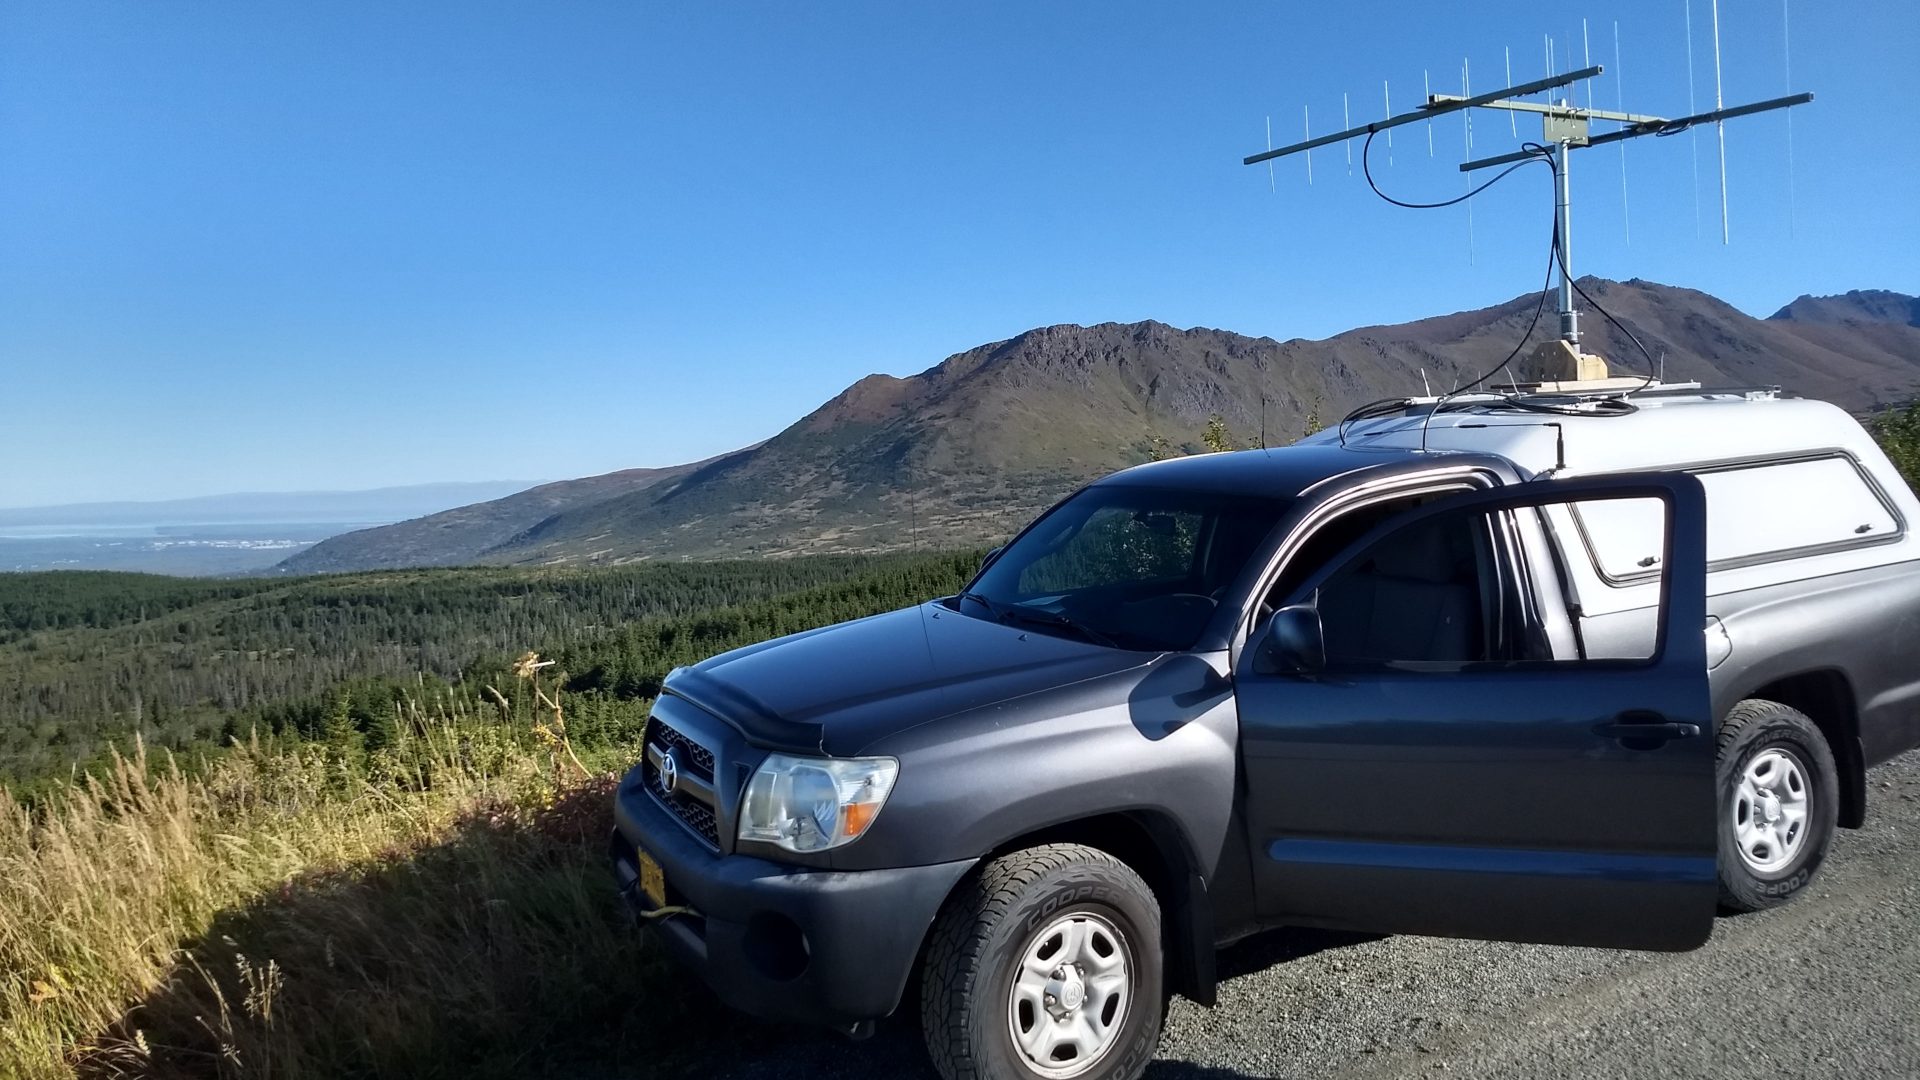 VHF rover on the side of the road above Anchorage, Alaska